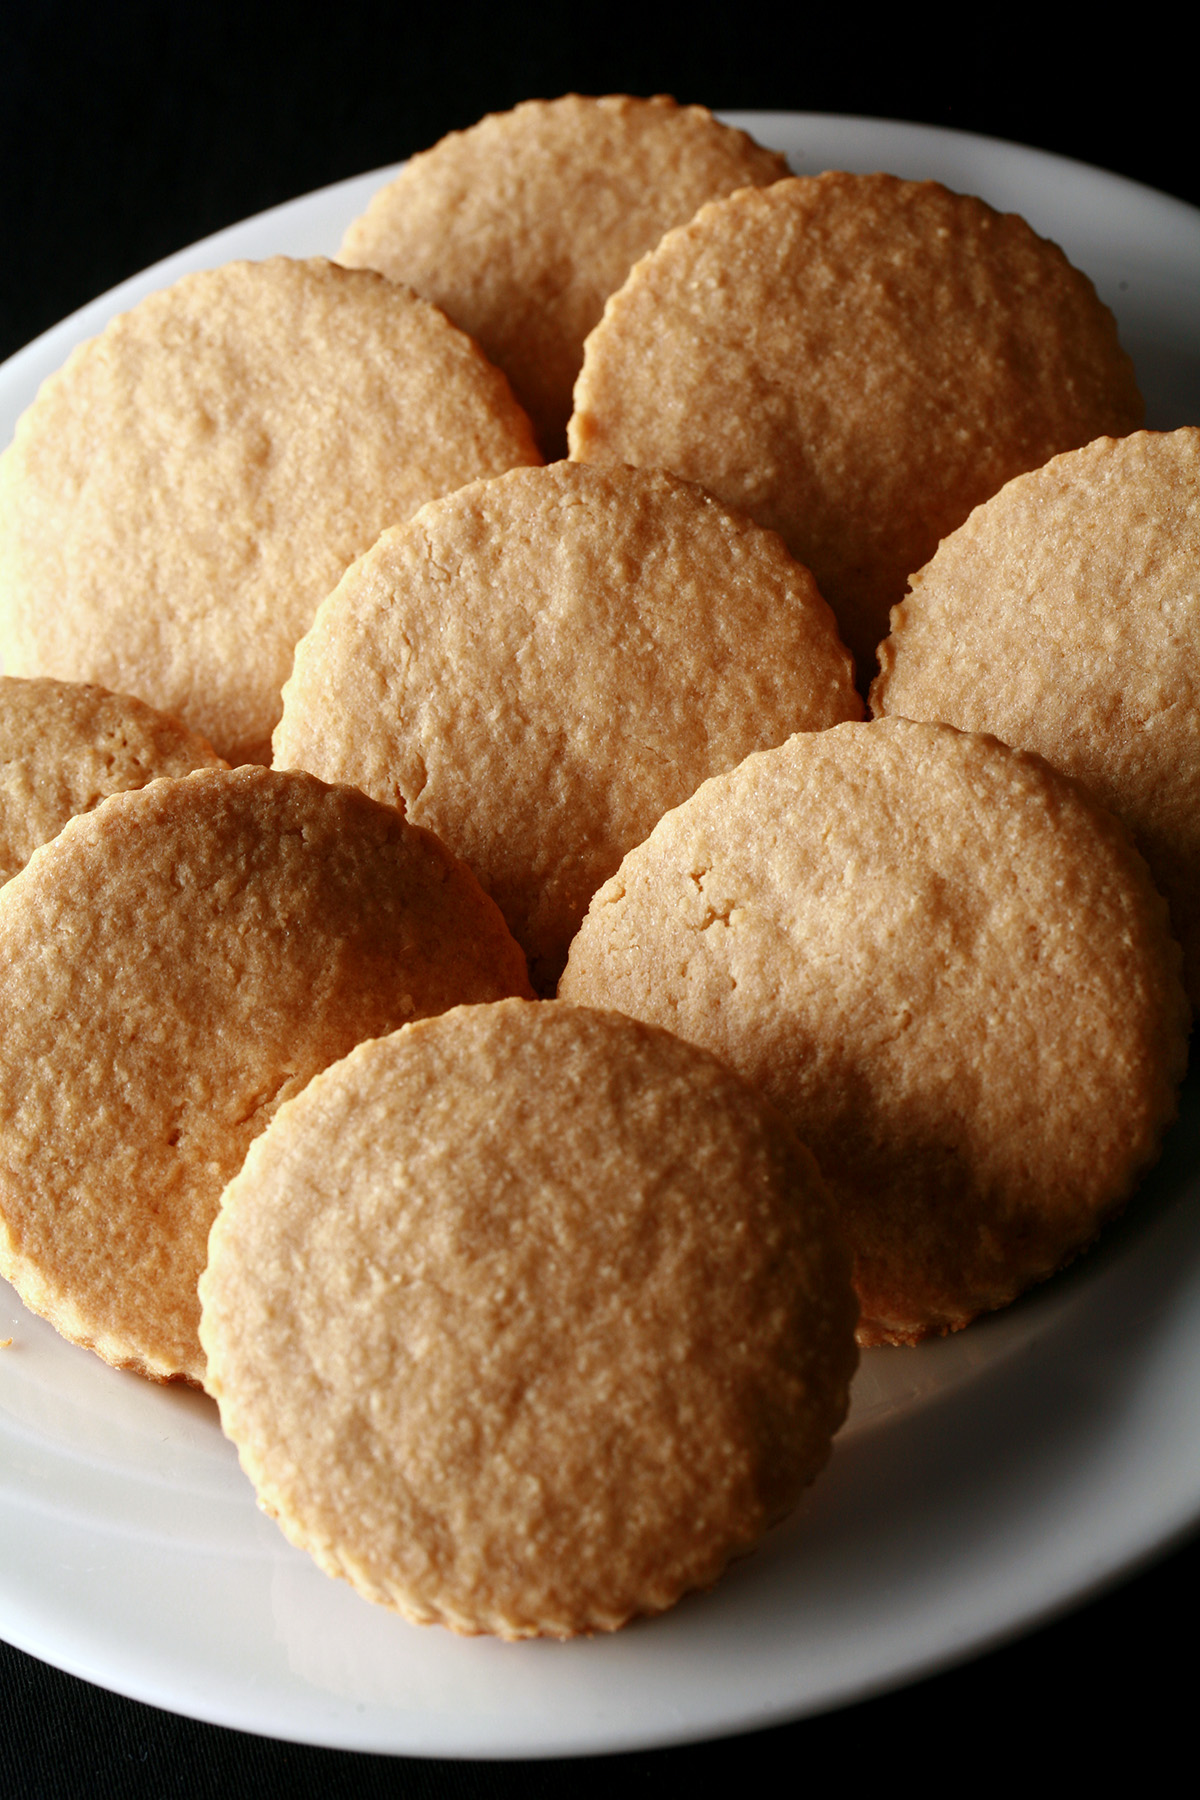 A plate of round gluten-free shortbread cookies.